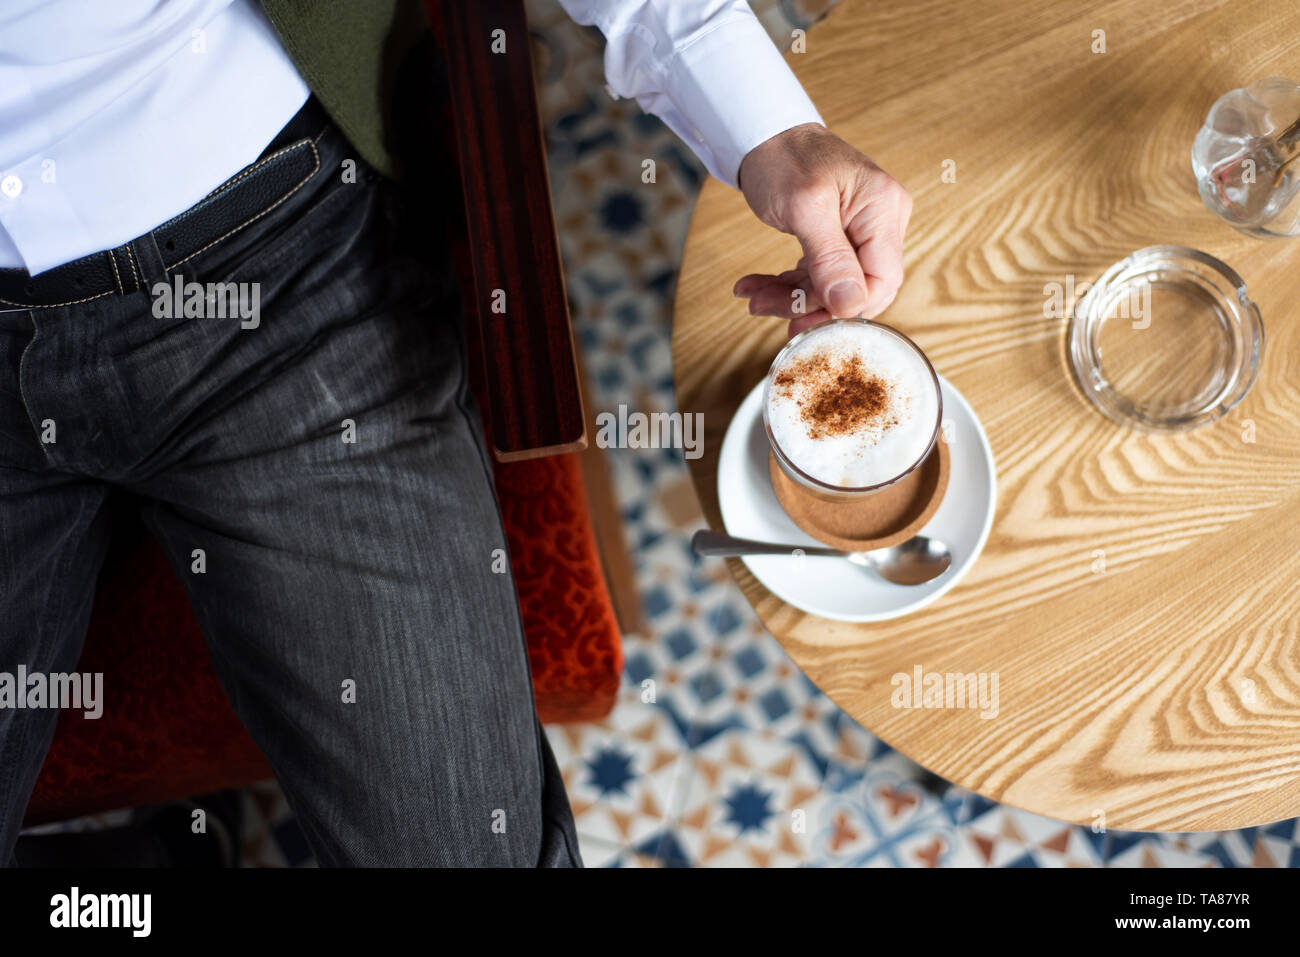 Man having a cup of coffee in the bar Stock Photo